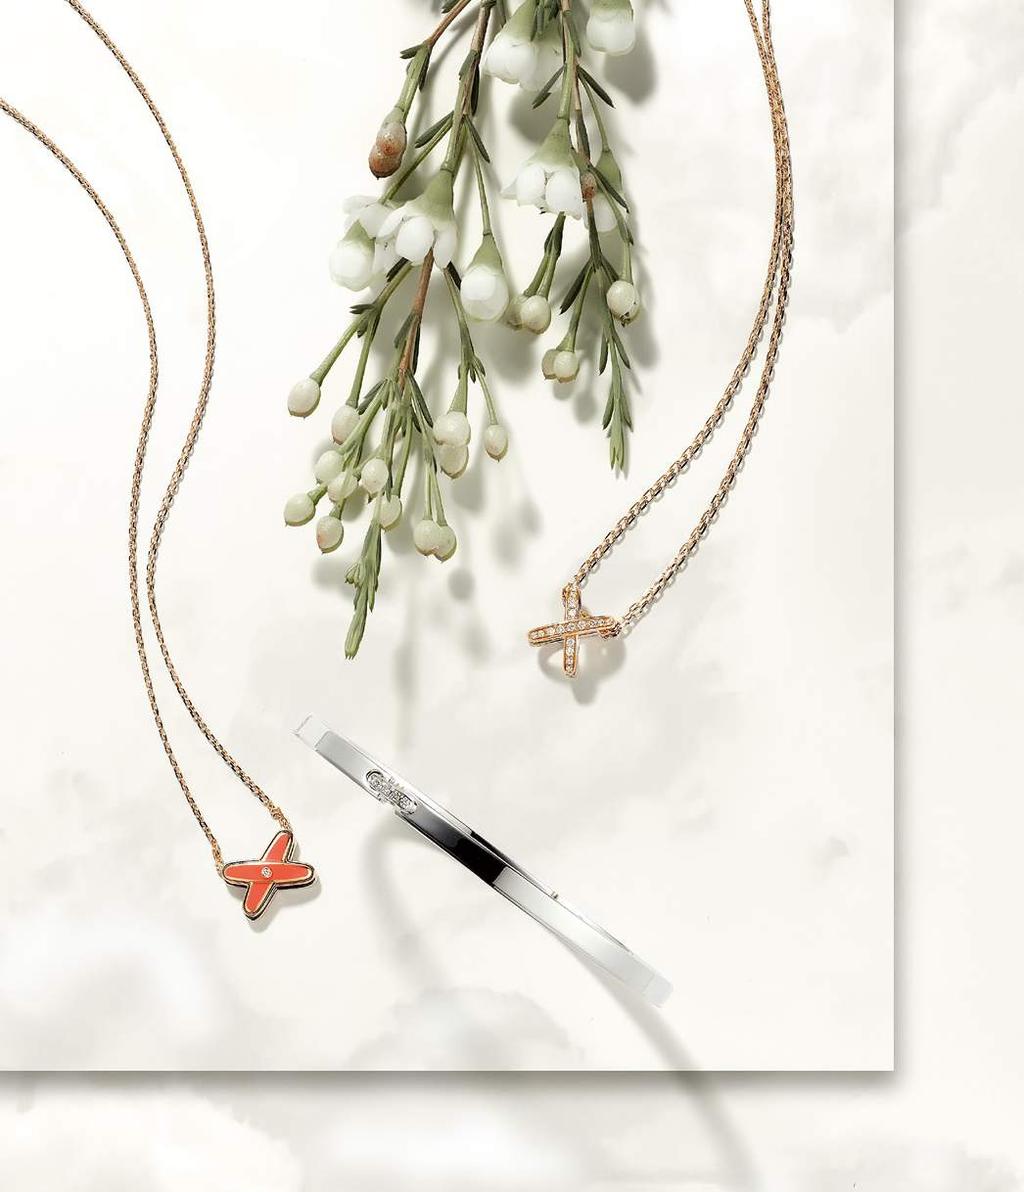 (from left) Jeux de Liens Pendant in 18kt pink gold with 1 pave brilliant-cut diamond and orange lacquer Liens